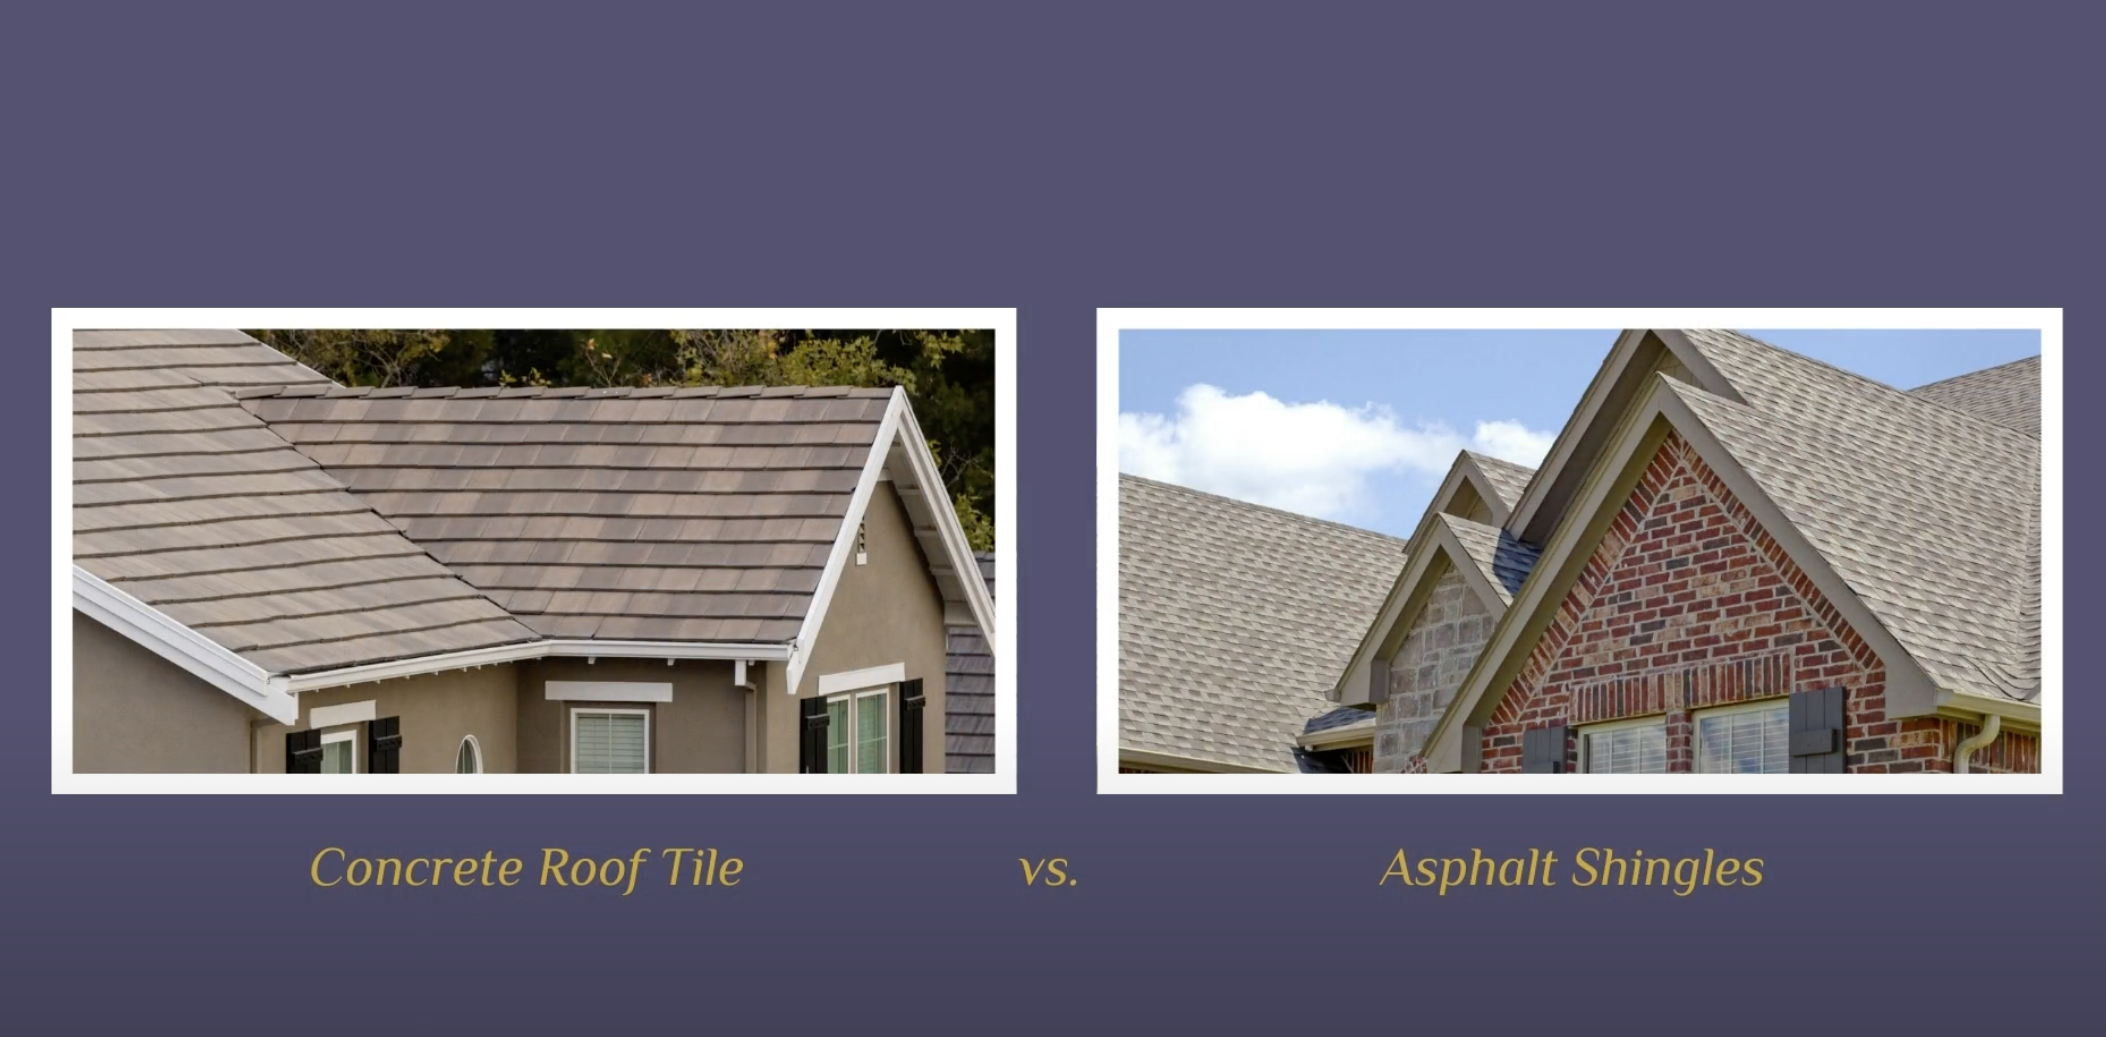 You are currently viewing Concrete Roof Tiles vs. Asphalt Shingles